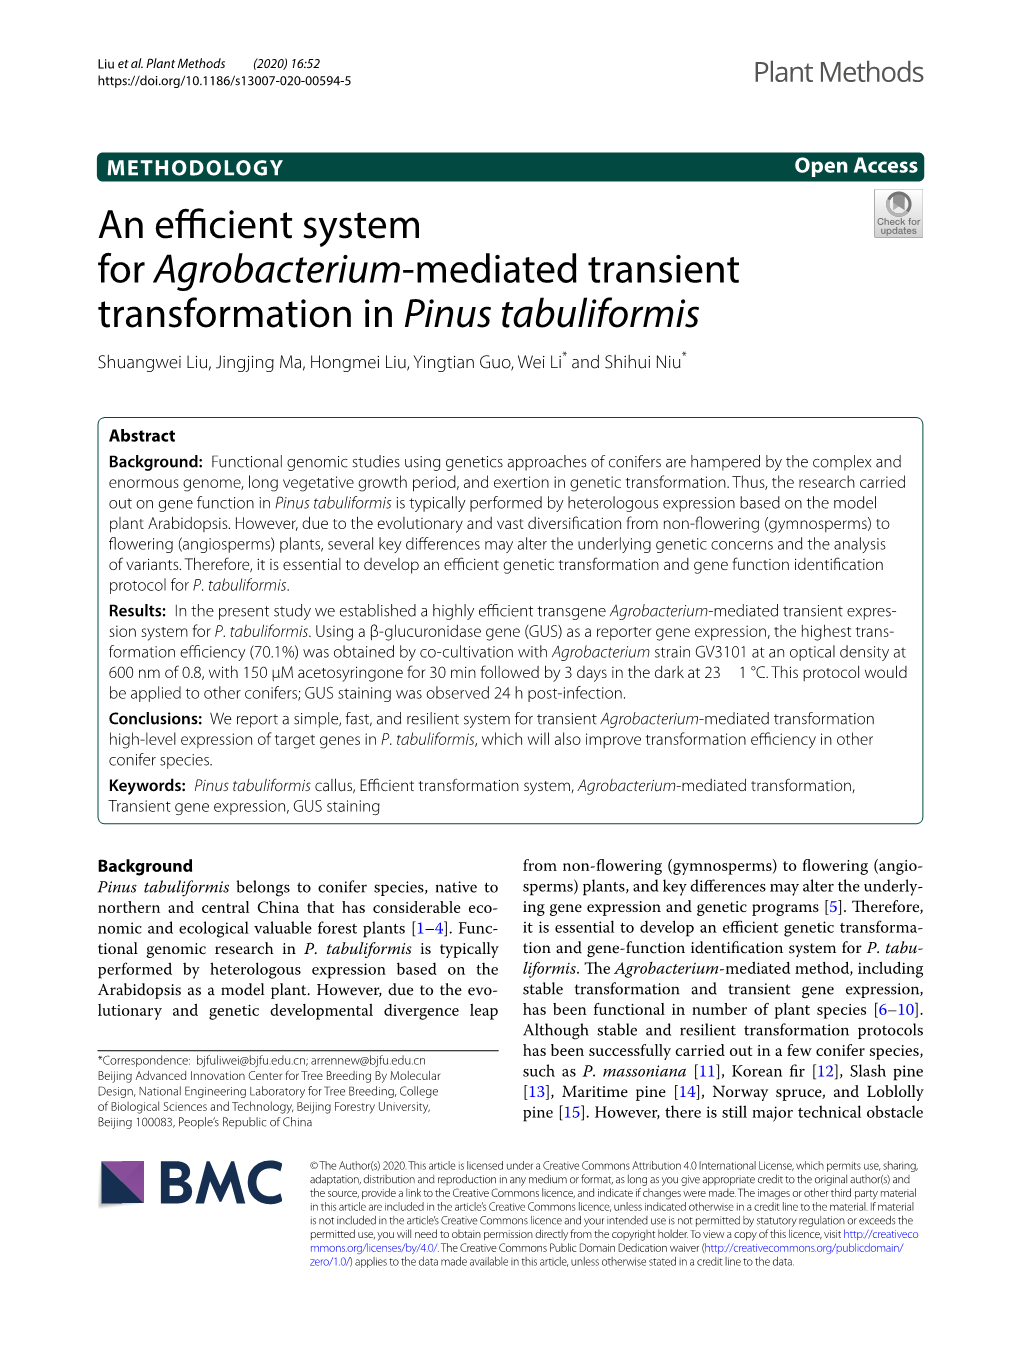 An Efficient System for Agrobacterium-Mediated Transient